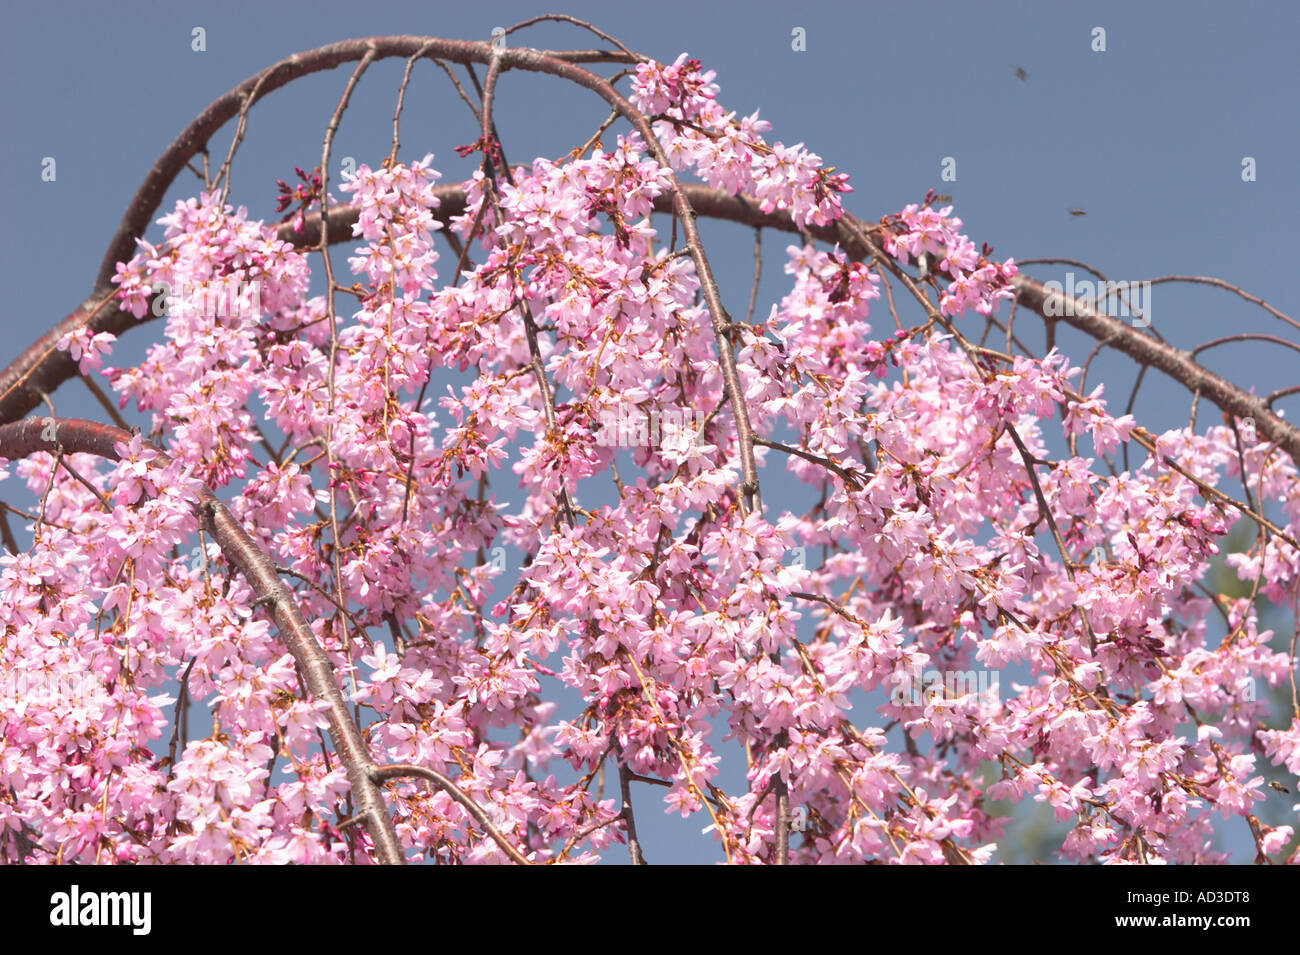 A close up of a weeping cherry blossom. Stock Photo